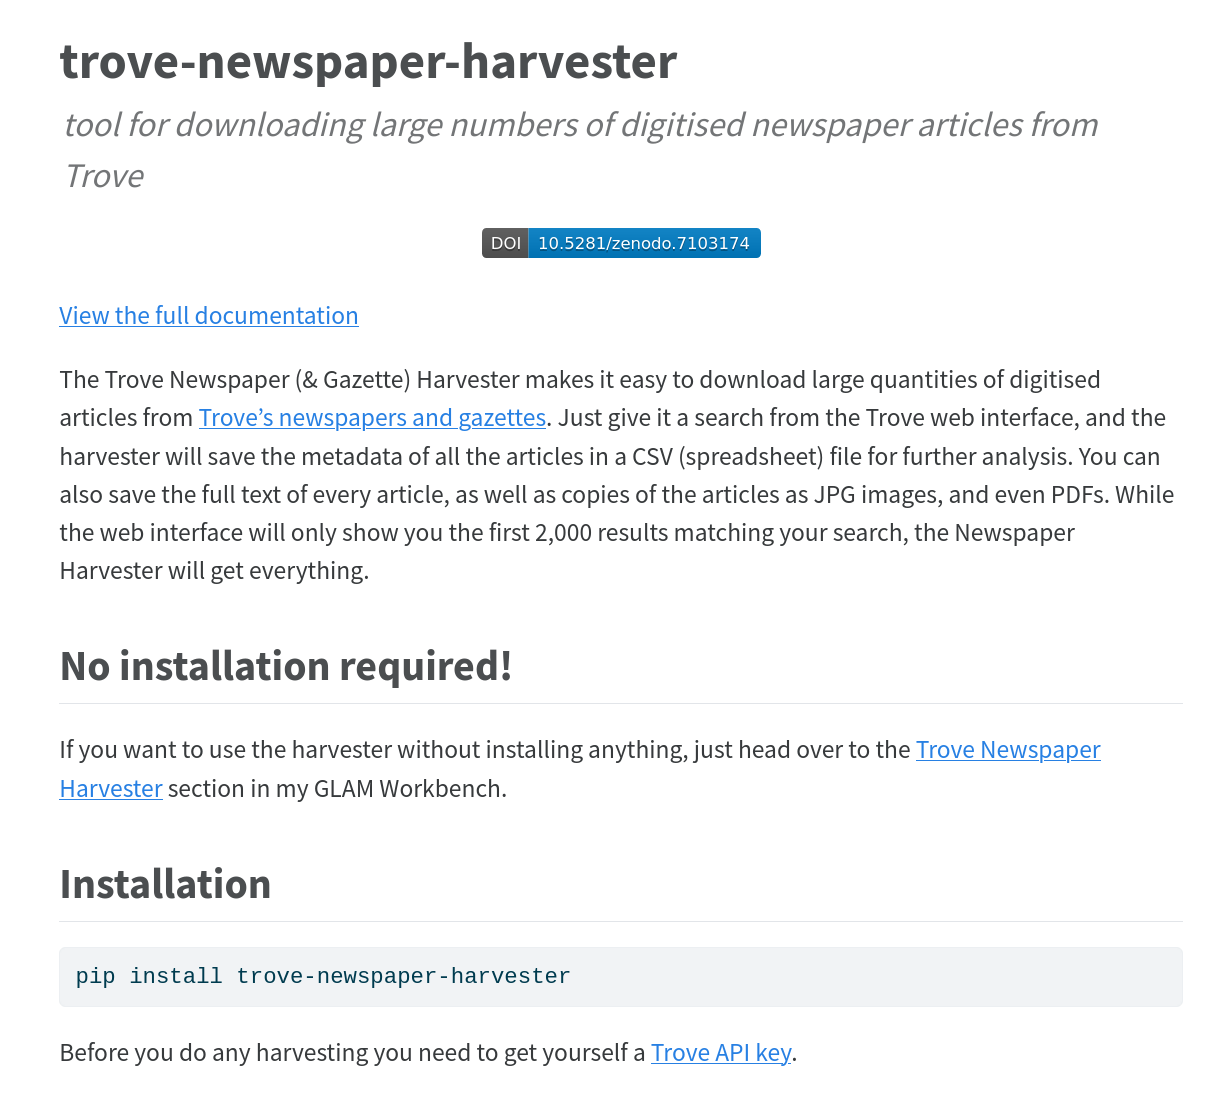 Screenshot of the Trove Newspaper and Gazette Harvester documentation page.